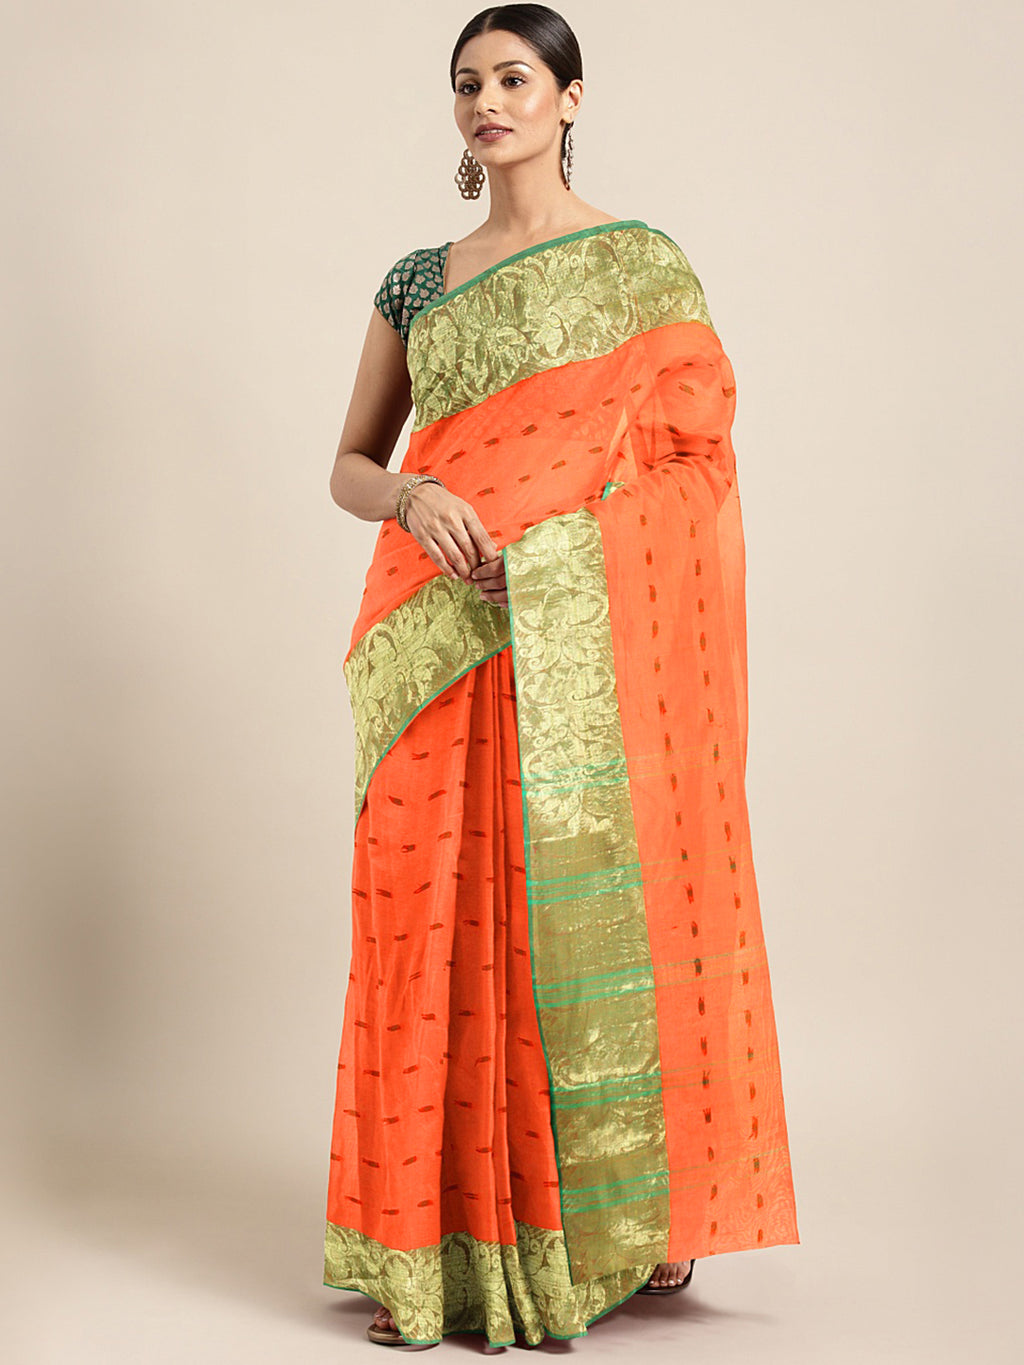 Orange Tant Woven Design Saree Without Blouse Piece DUTASA030 DUTASA030-Saree-Kalakari India-DUTASA030-Geographical Indication, Hand Crafted, Heritage Prints, Natural Dyes, Sarees, Silk Cotton, Sustainable Fabrics, Taant, Tant, West Bengal, Woven-[Linen,Ethnic,wear,Fashionista,Handloom,Handicraft,Indigo,blockprint,block,print,Cotton,Chanderi,Blue, latest,classy,party,bollywood,trendy,summer,style,traditional,formal,elegant,unique,style,hand,block,print, dabu,booti,gift,present,glamorous,affordab